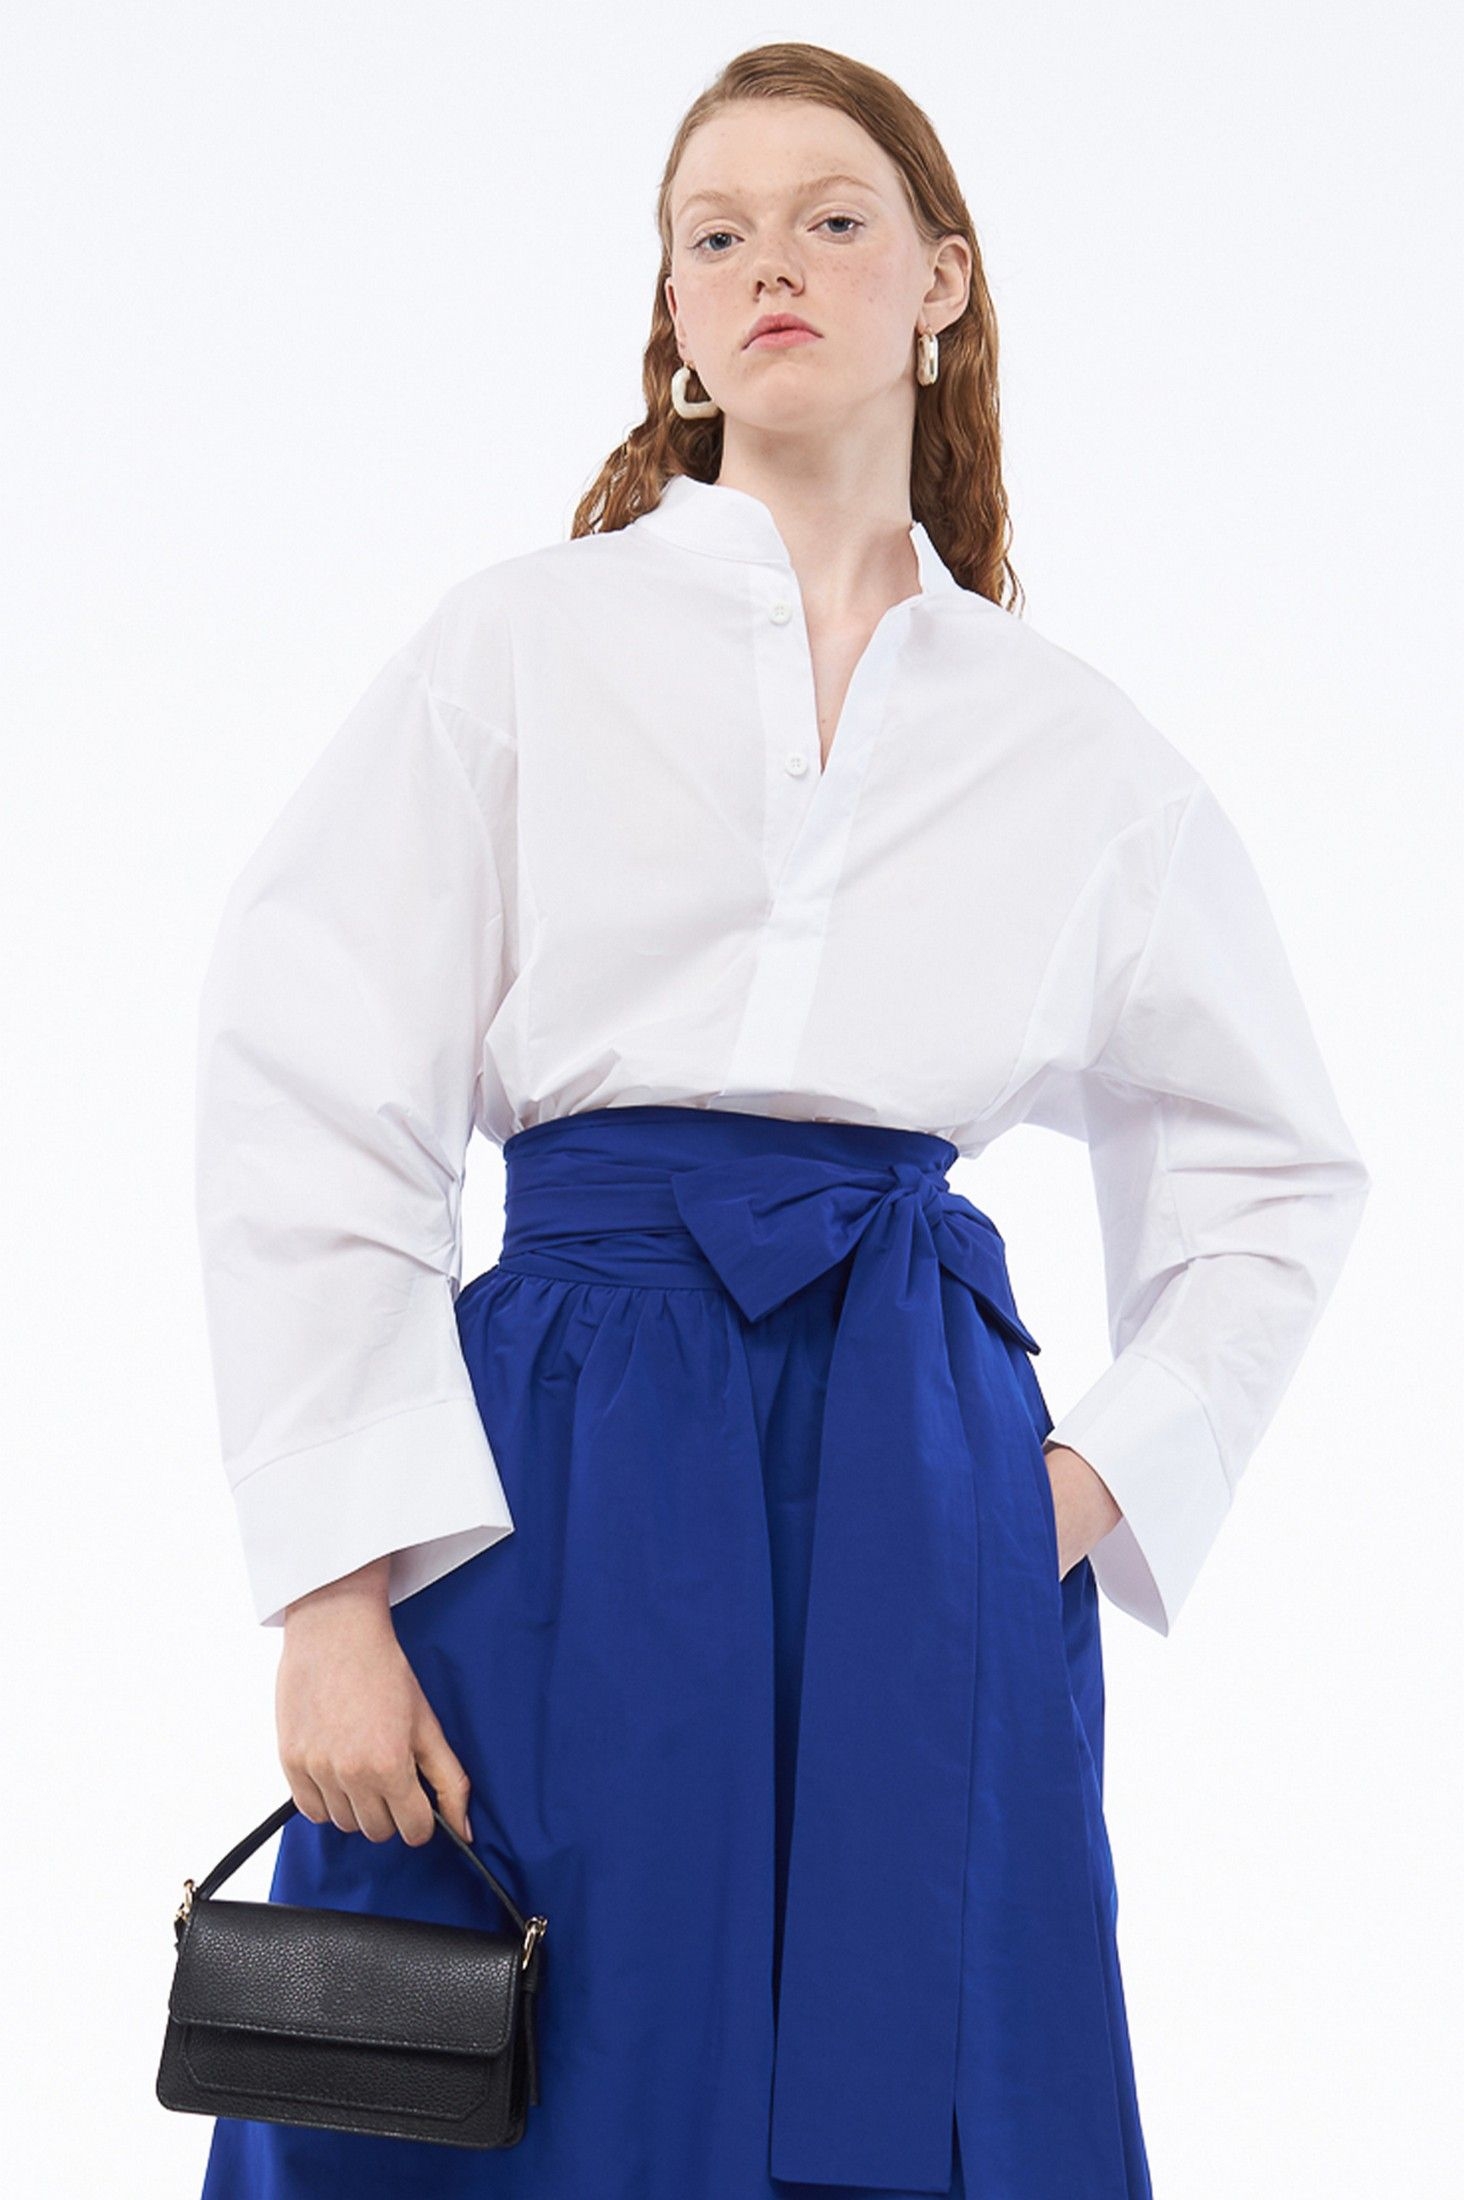 Darted waist shirt with pockets white ' - ' ΤΟΠ